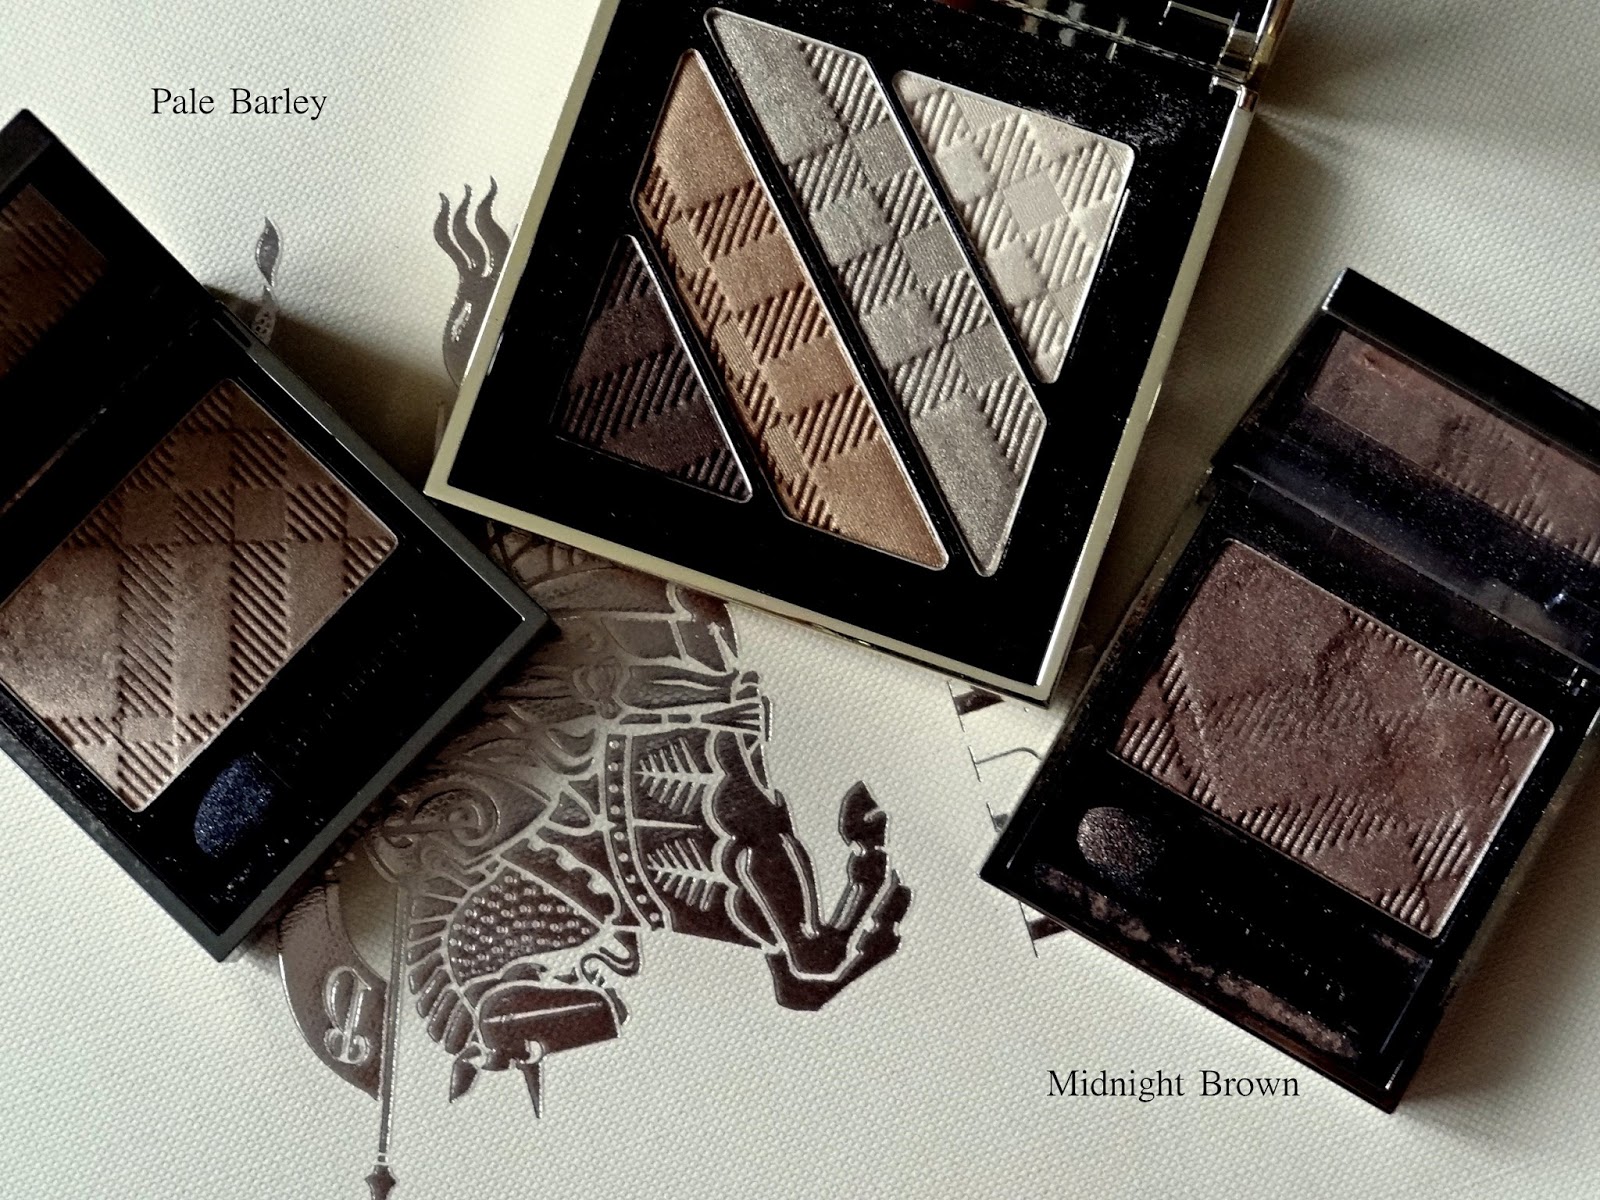 Burberry Beauty Complete Eye Palette in Gold No.25 Swatches Comparison to pale barley and mignight brown